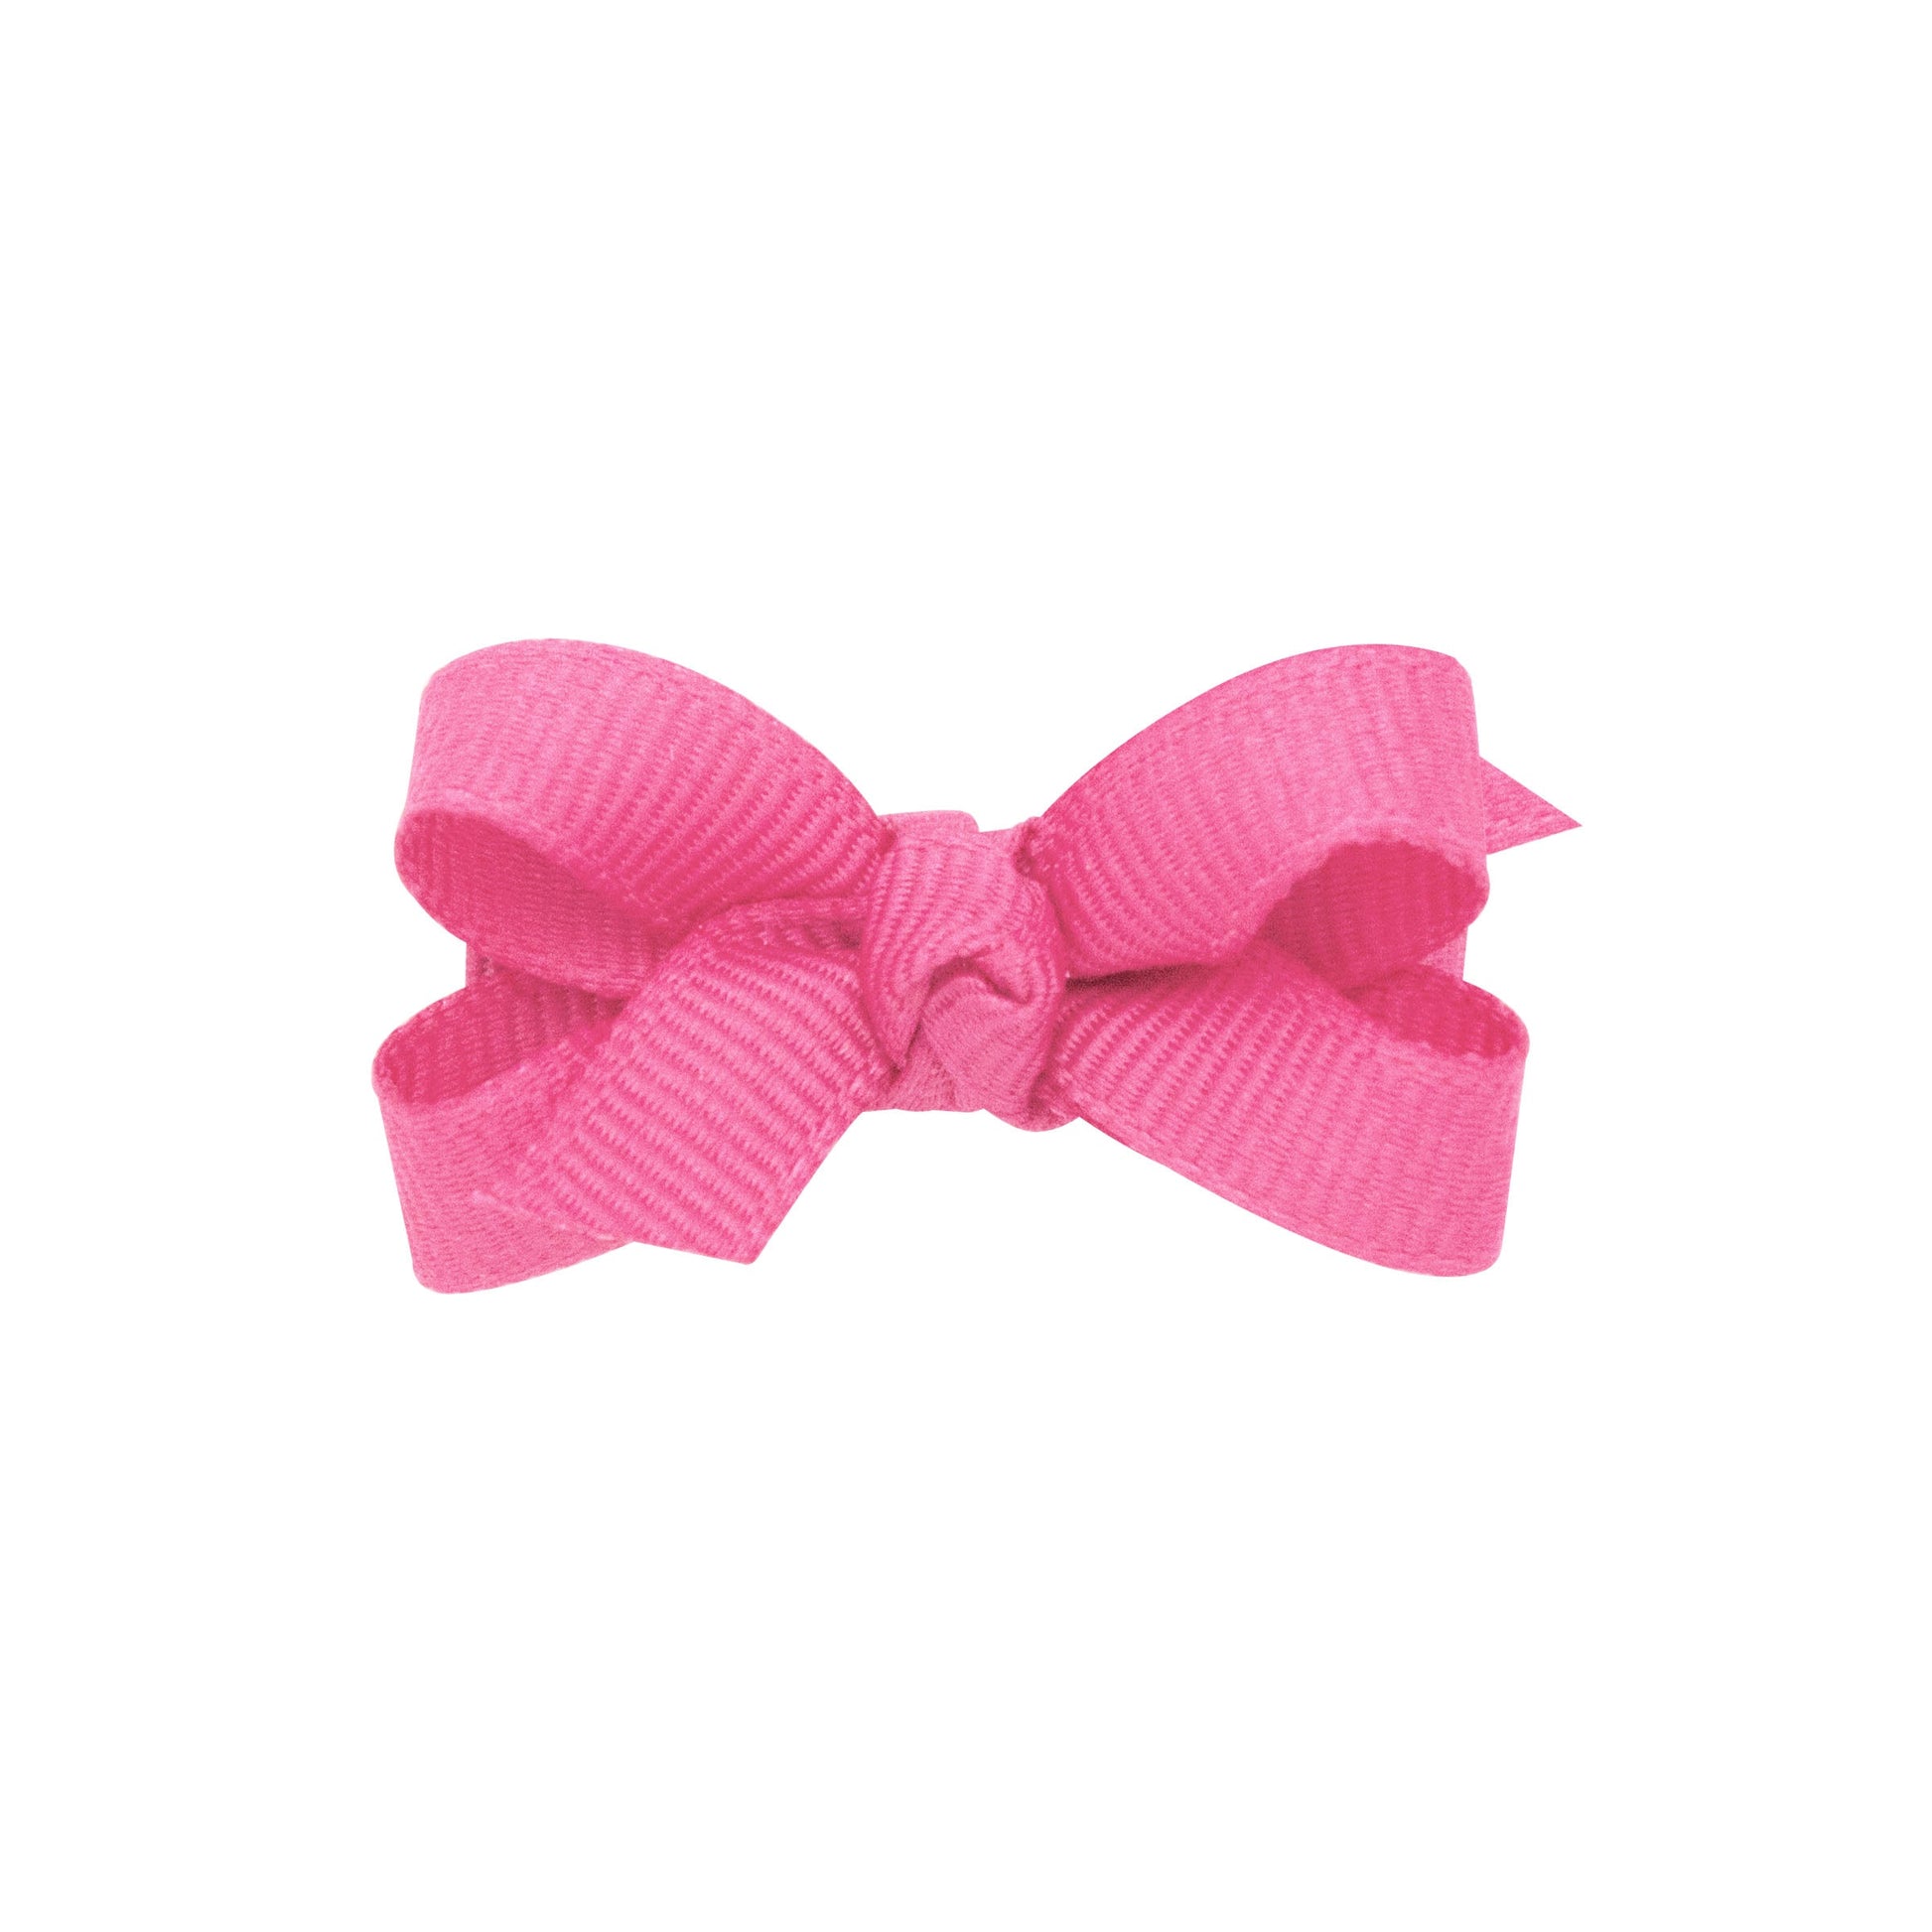 Wee Ones Medium Monogrammed Grosgrain Girls Hair Bow - Light Pink with Hot Pink Initial T